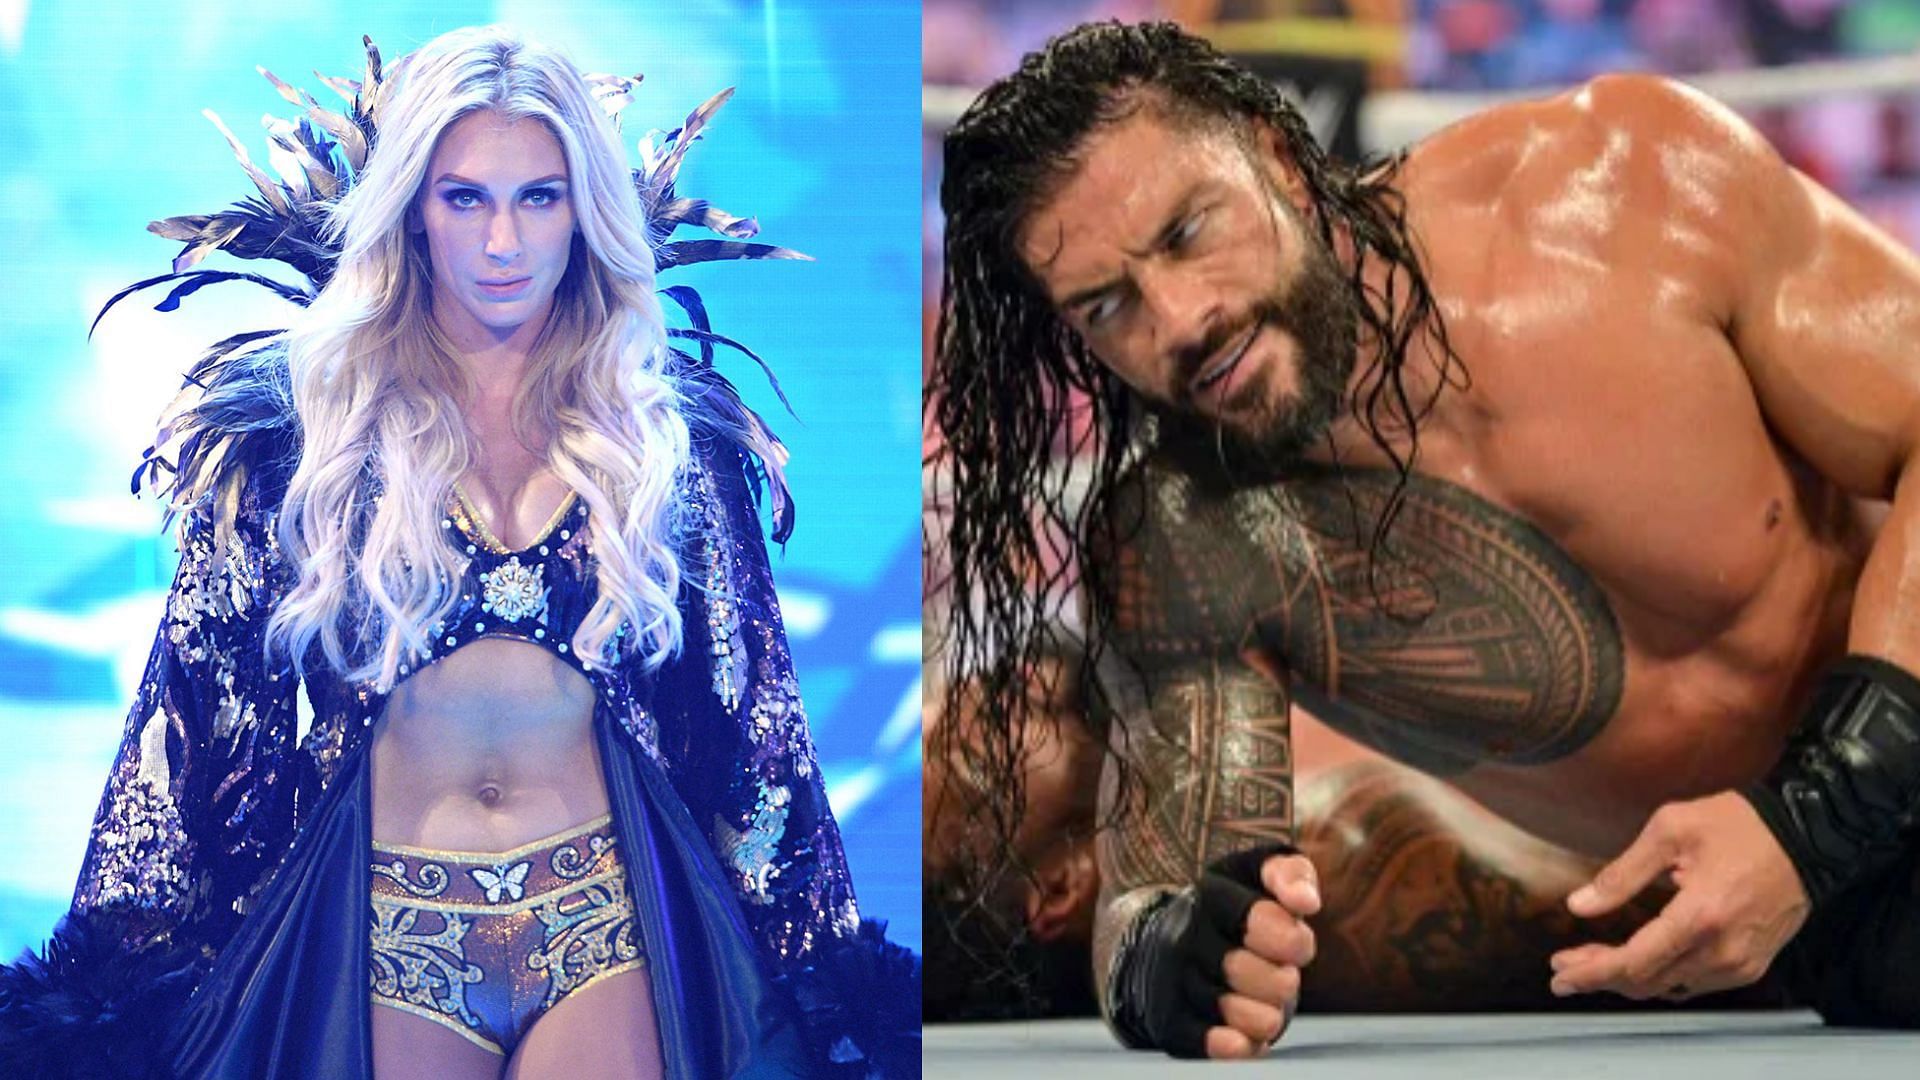 Charlotte Flair and Roman Reigns could leave SummerSlam 2023 with titles.